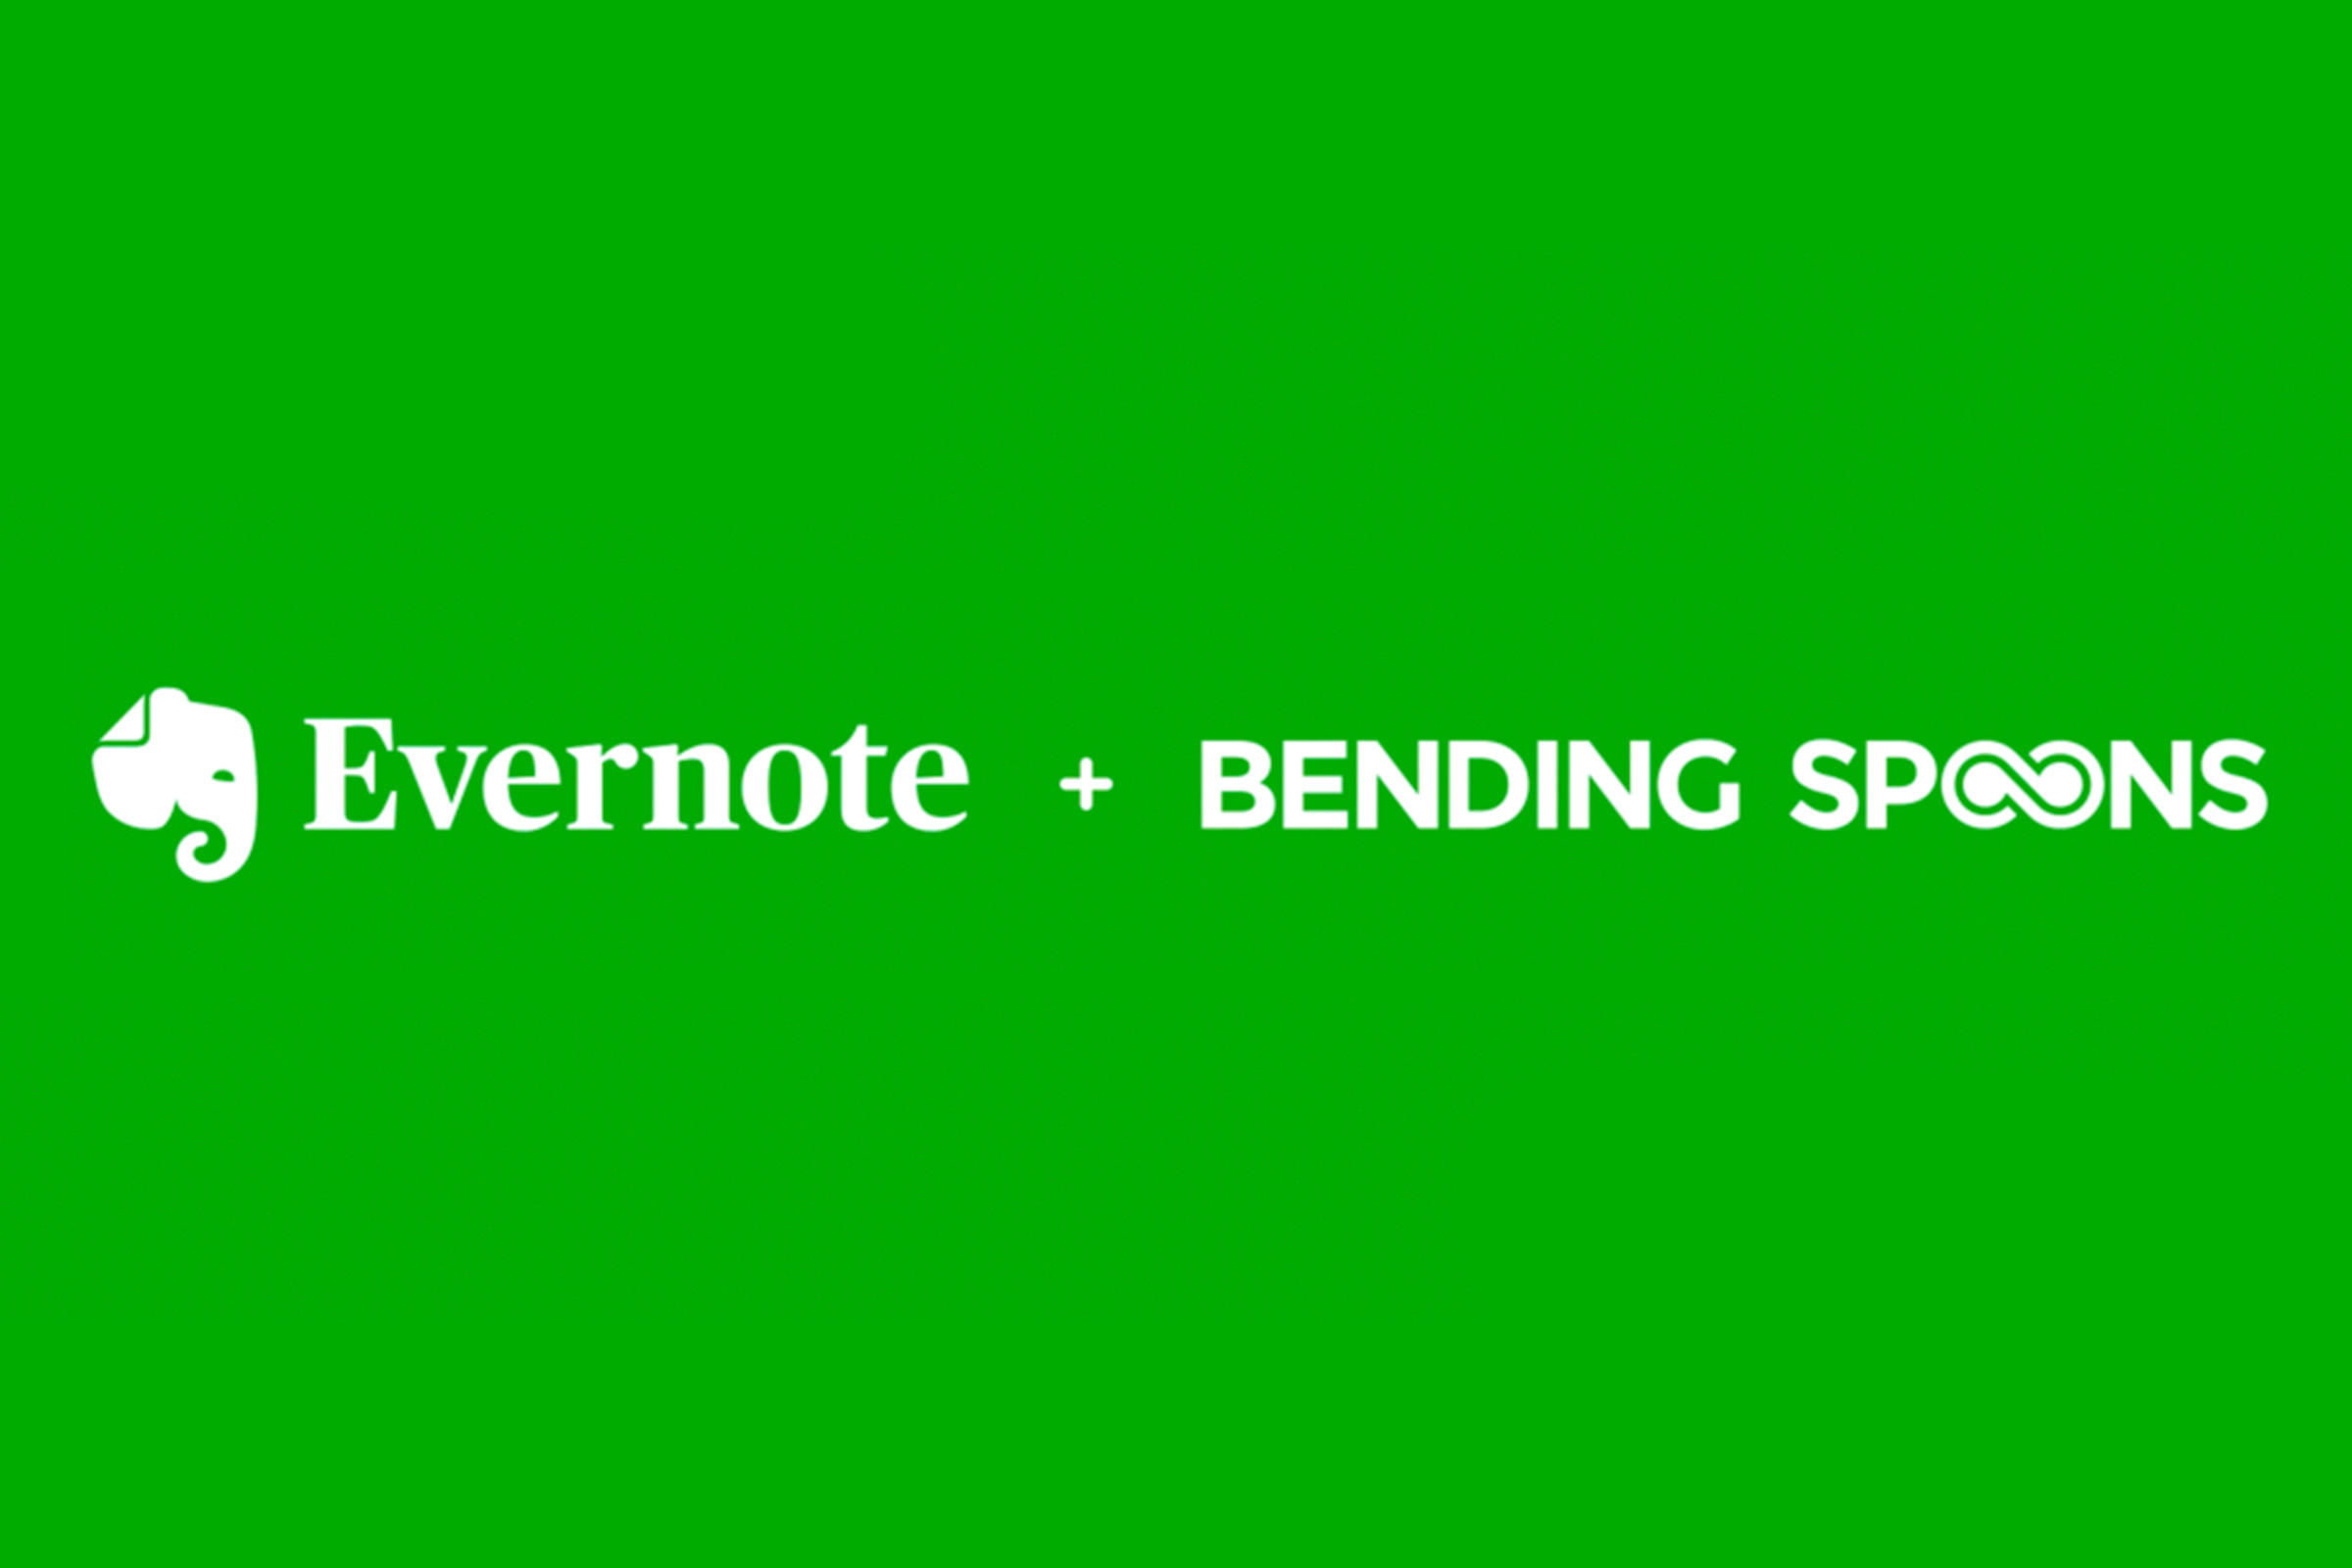 A green background with the Evernote name and logo and the Bending Spoons logo imprinted on it in white.